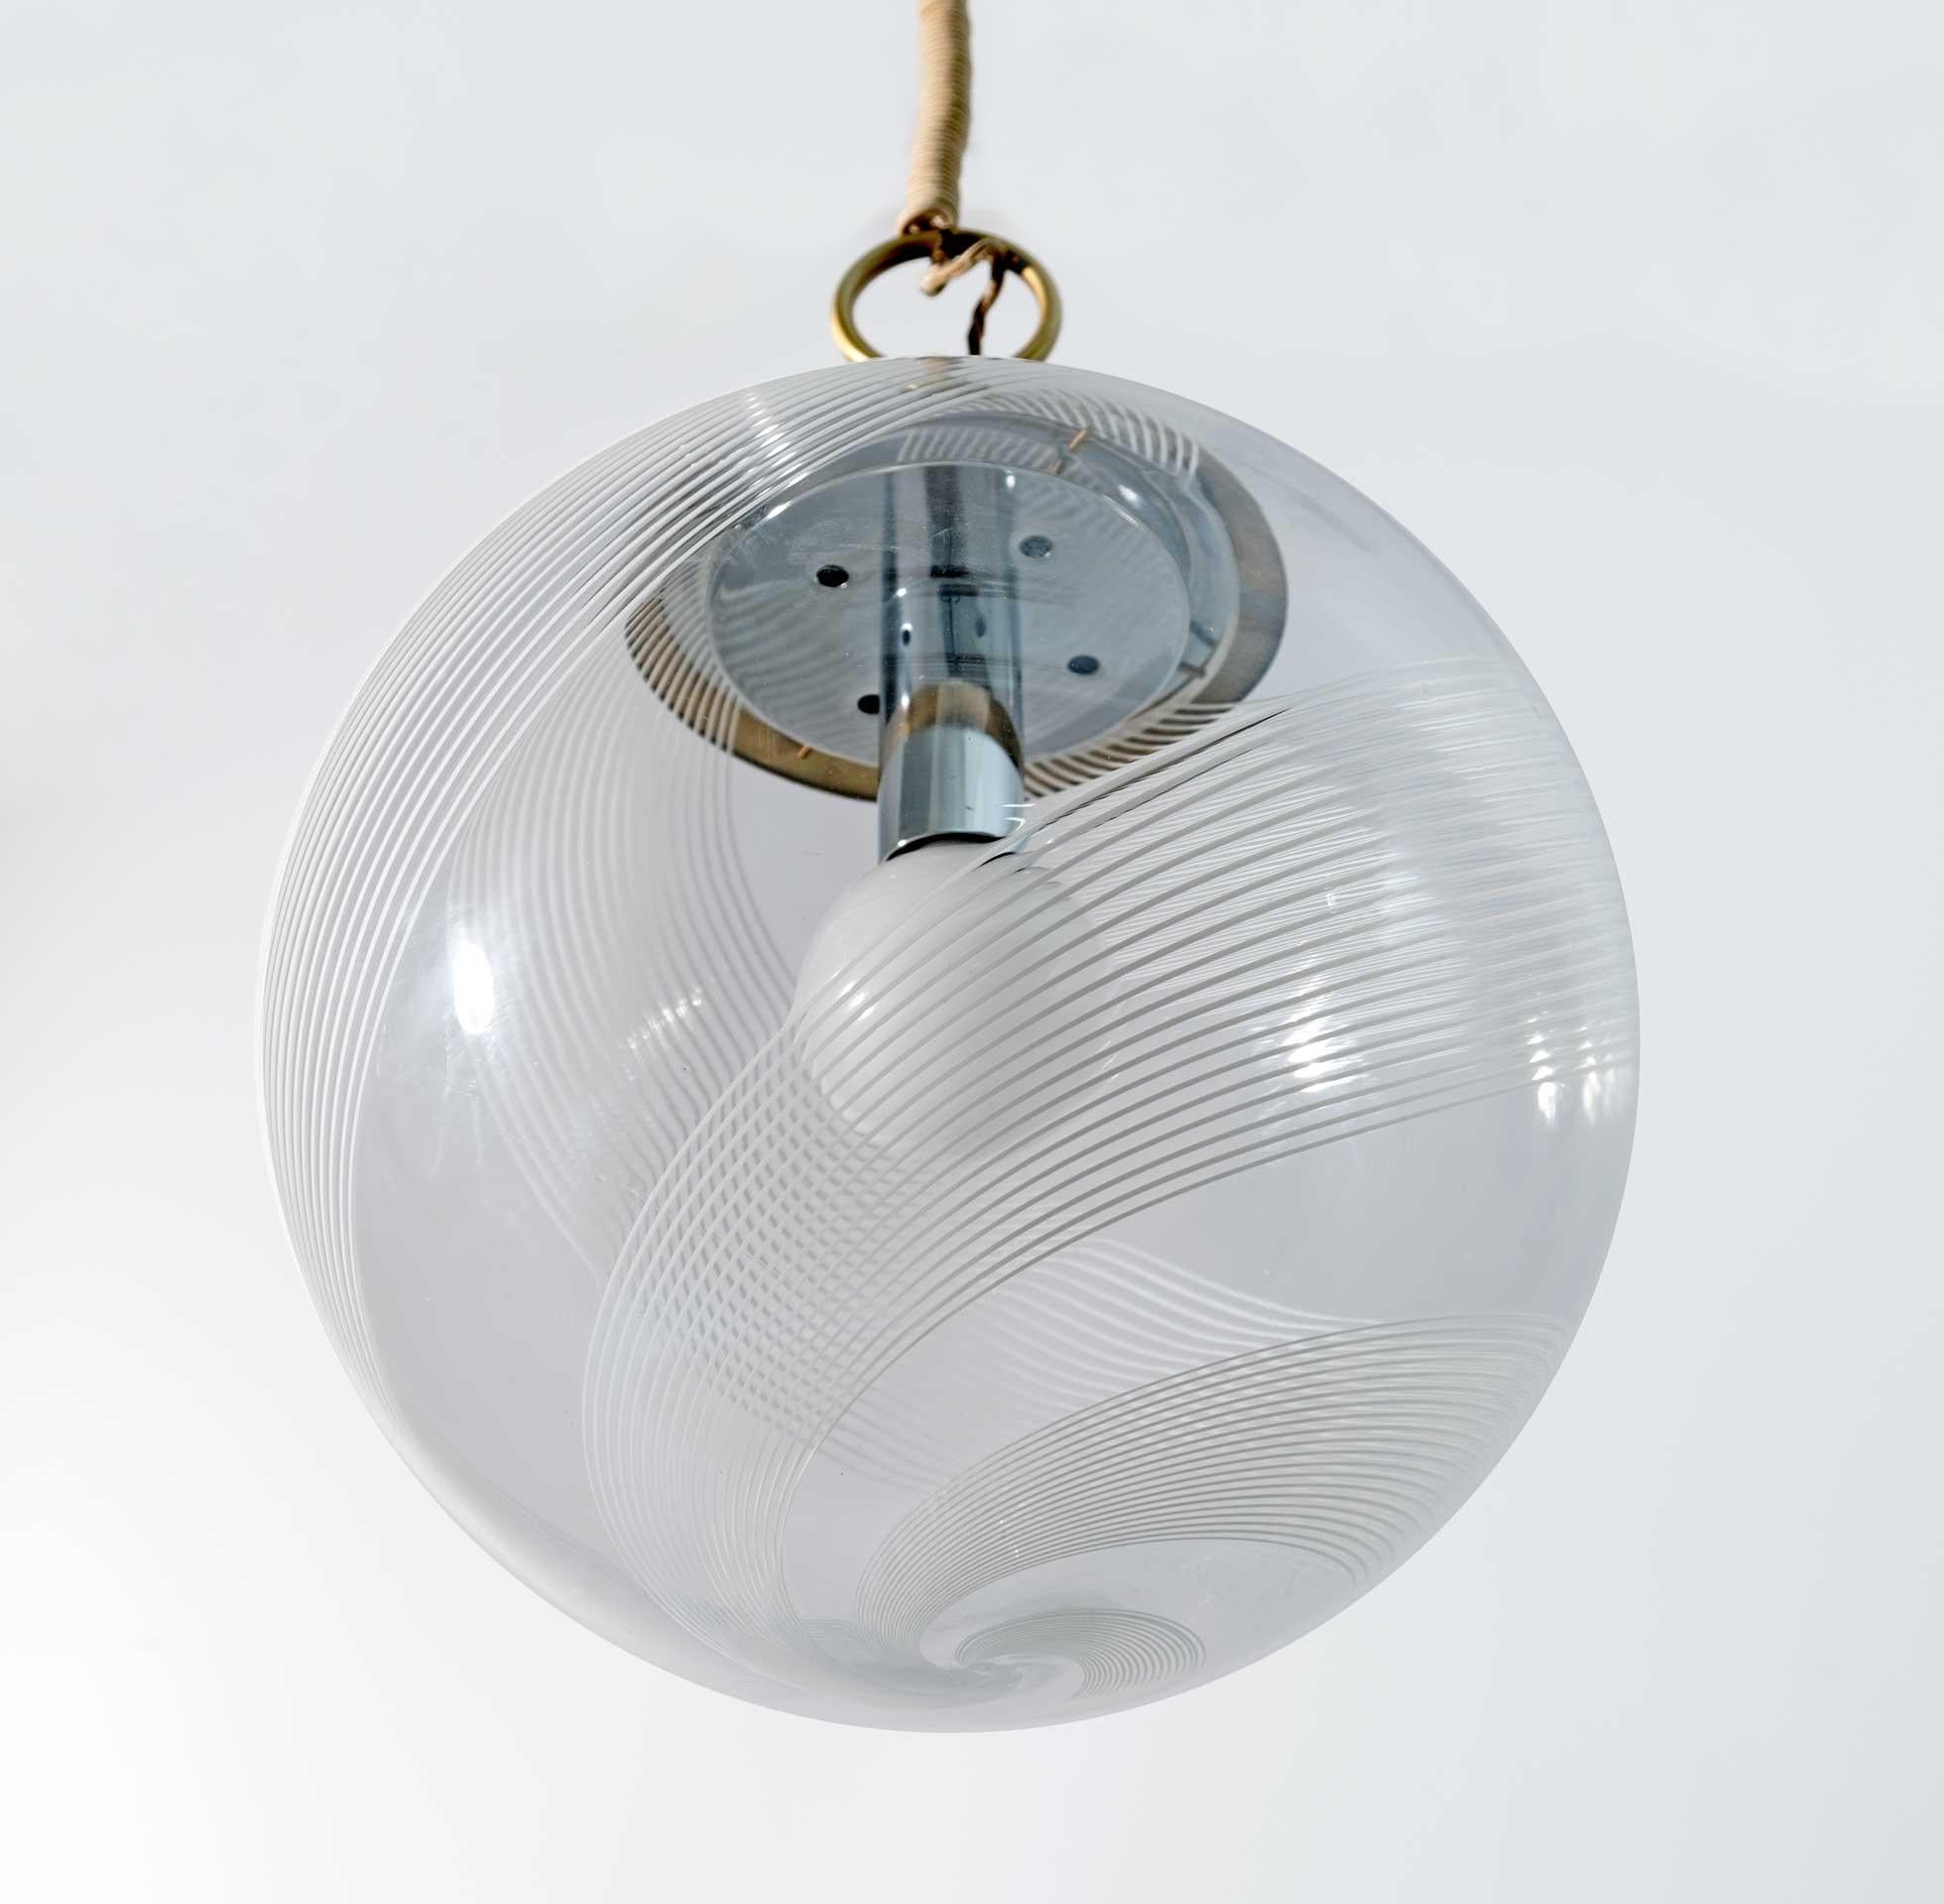 Large 1970s Space Age suspension lamp with one light in Murano artistic glass and brass structure. The transparent glass shade features the classic movement of the double spiral band that wraps it from the bottom up, offering a fascinating visual